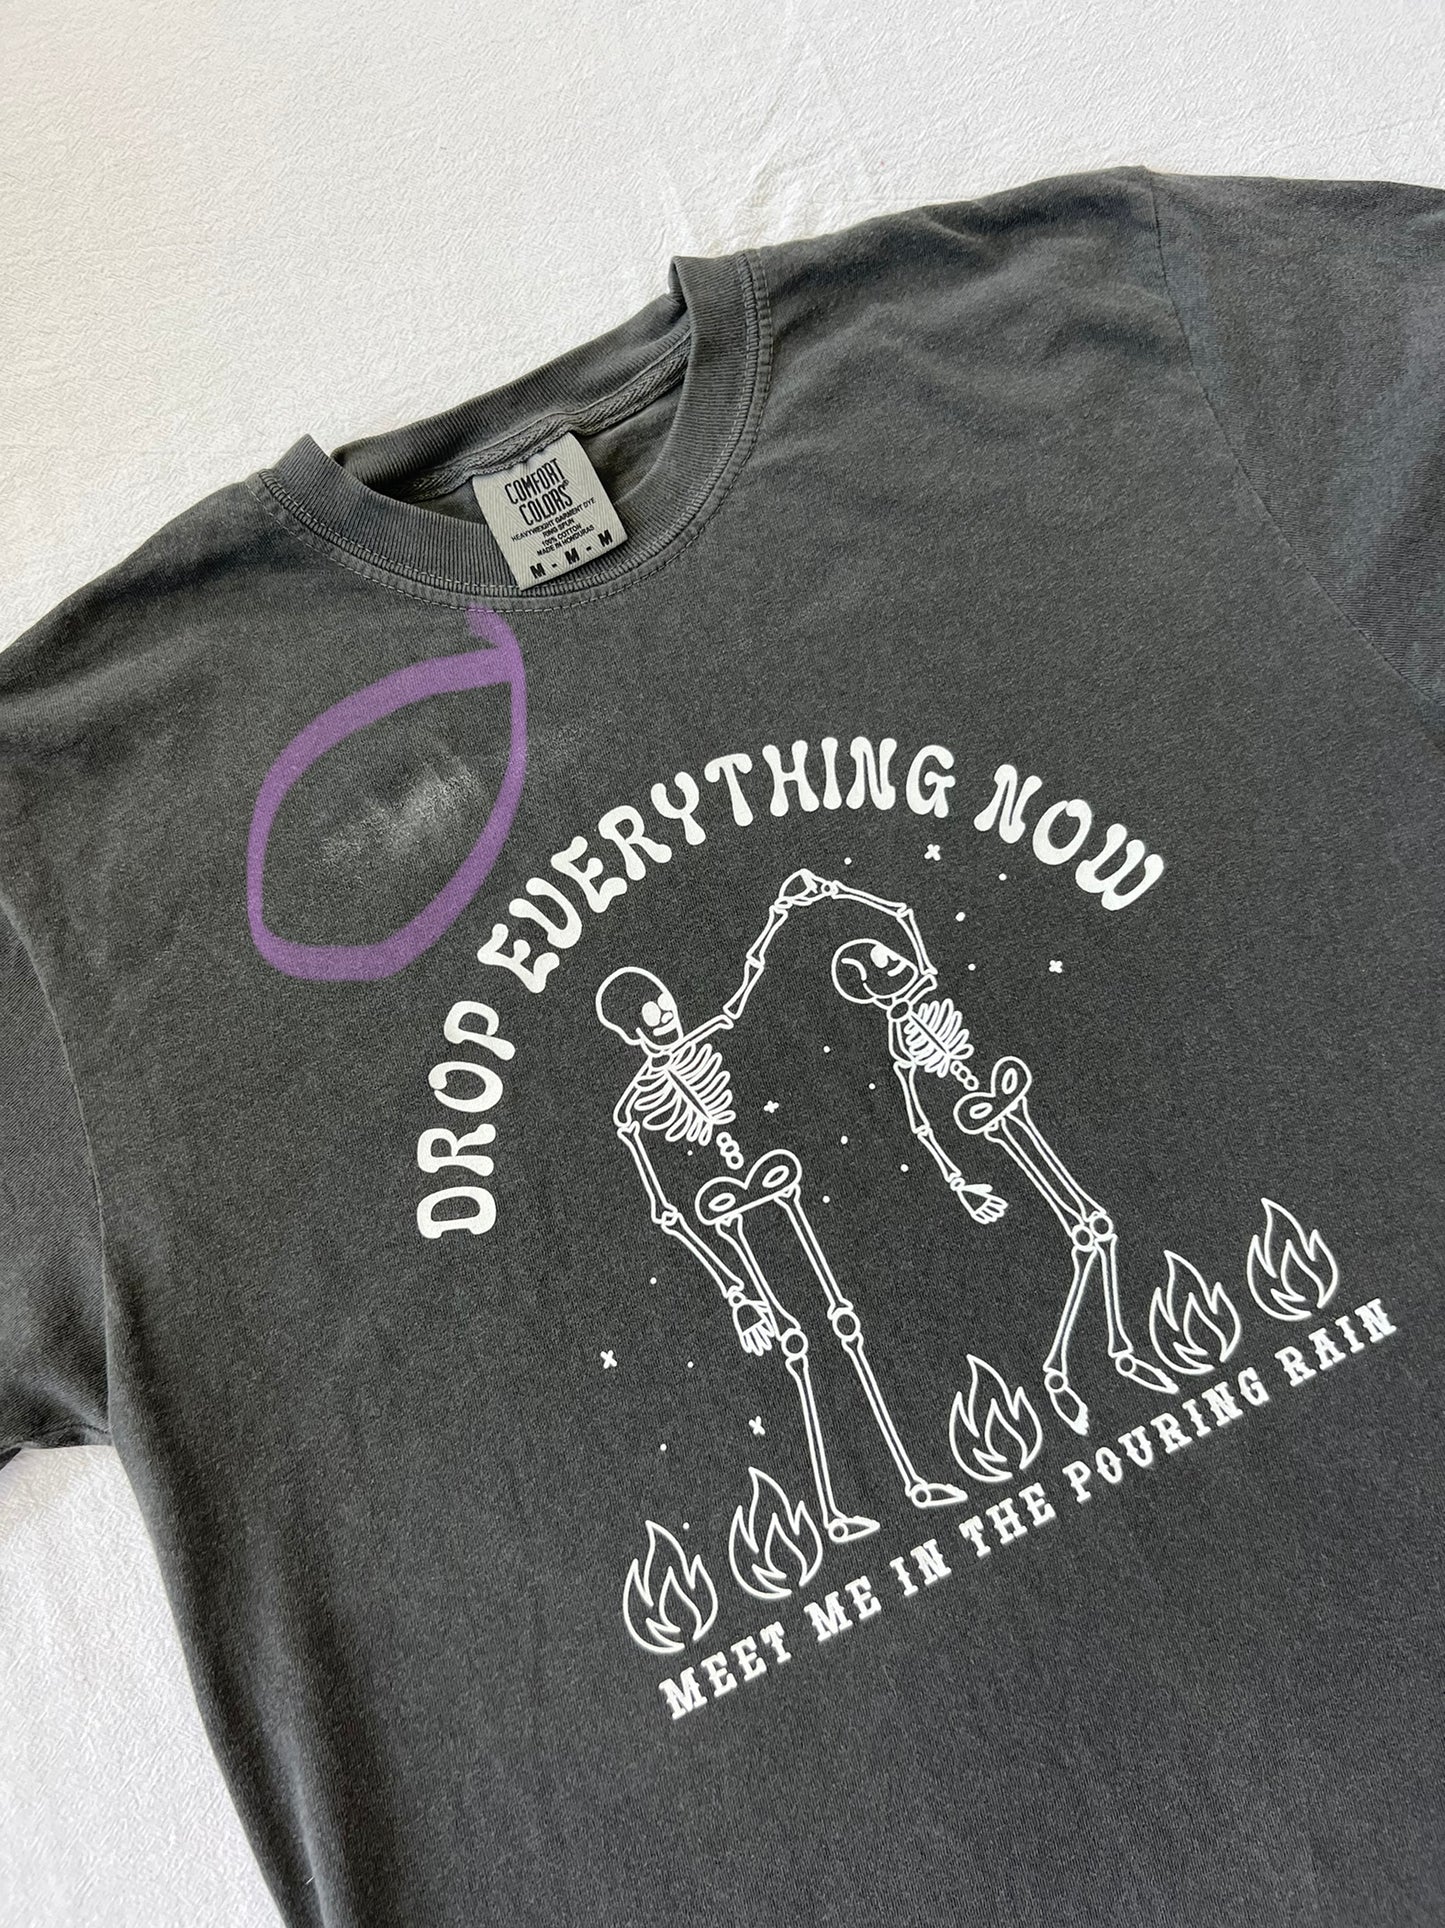 Drop Everything Now Tee: Size M (OOPSIE SHIRT)